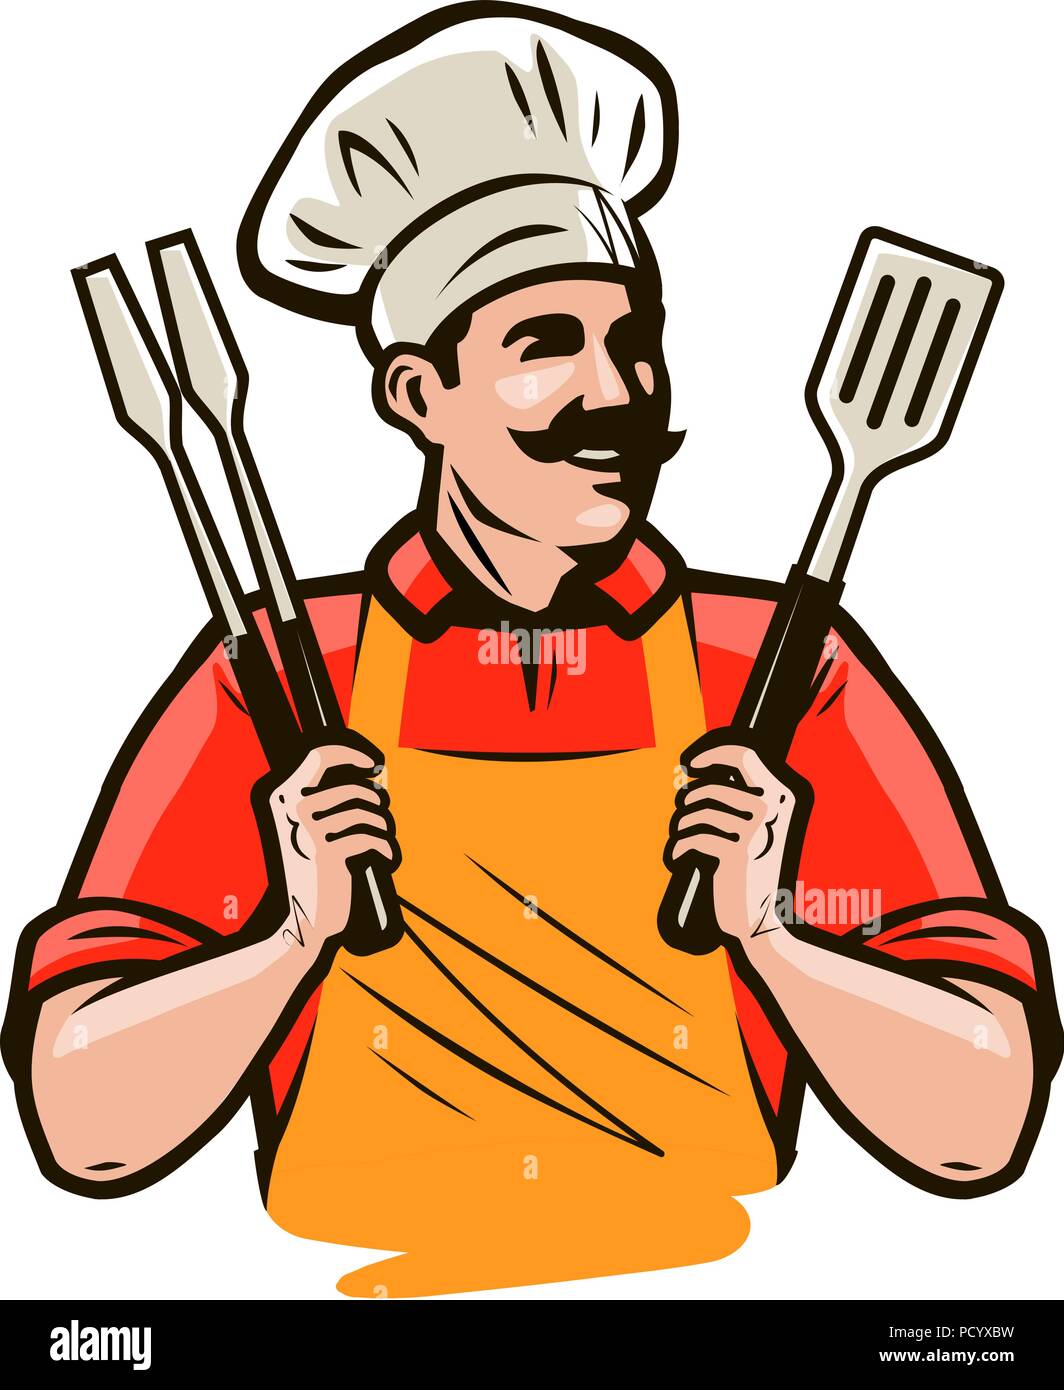 https://c8.alamy.com/comp/PCYXBW/chef-or-happy-cook-holding-a-grill-tools-tongs-and-spatula-barbecue-kebab-food-cartoon-vector-illustration-PCYXBW.jpg